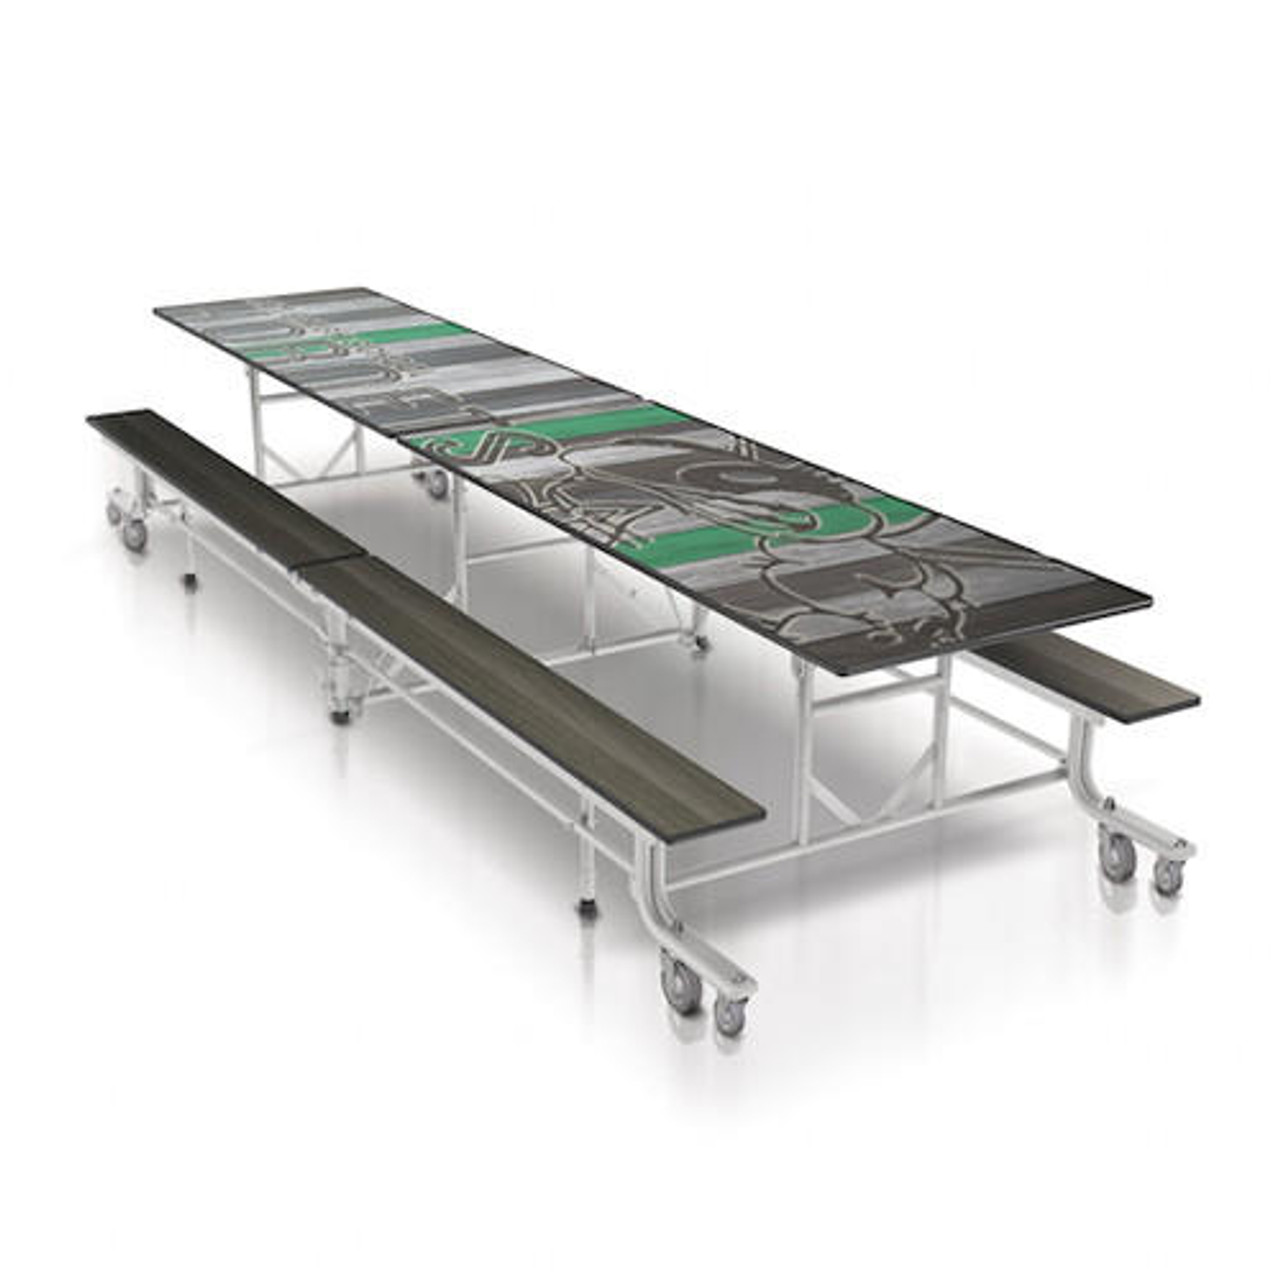 https://www.shifflerequip.com/palmer-19f-2019-new-size-model-mobile-cafeteria-table-with-benches-and-adjustable-height-8l-x-29w/